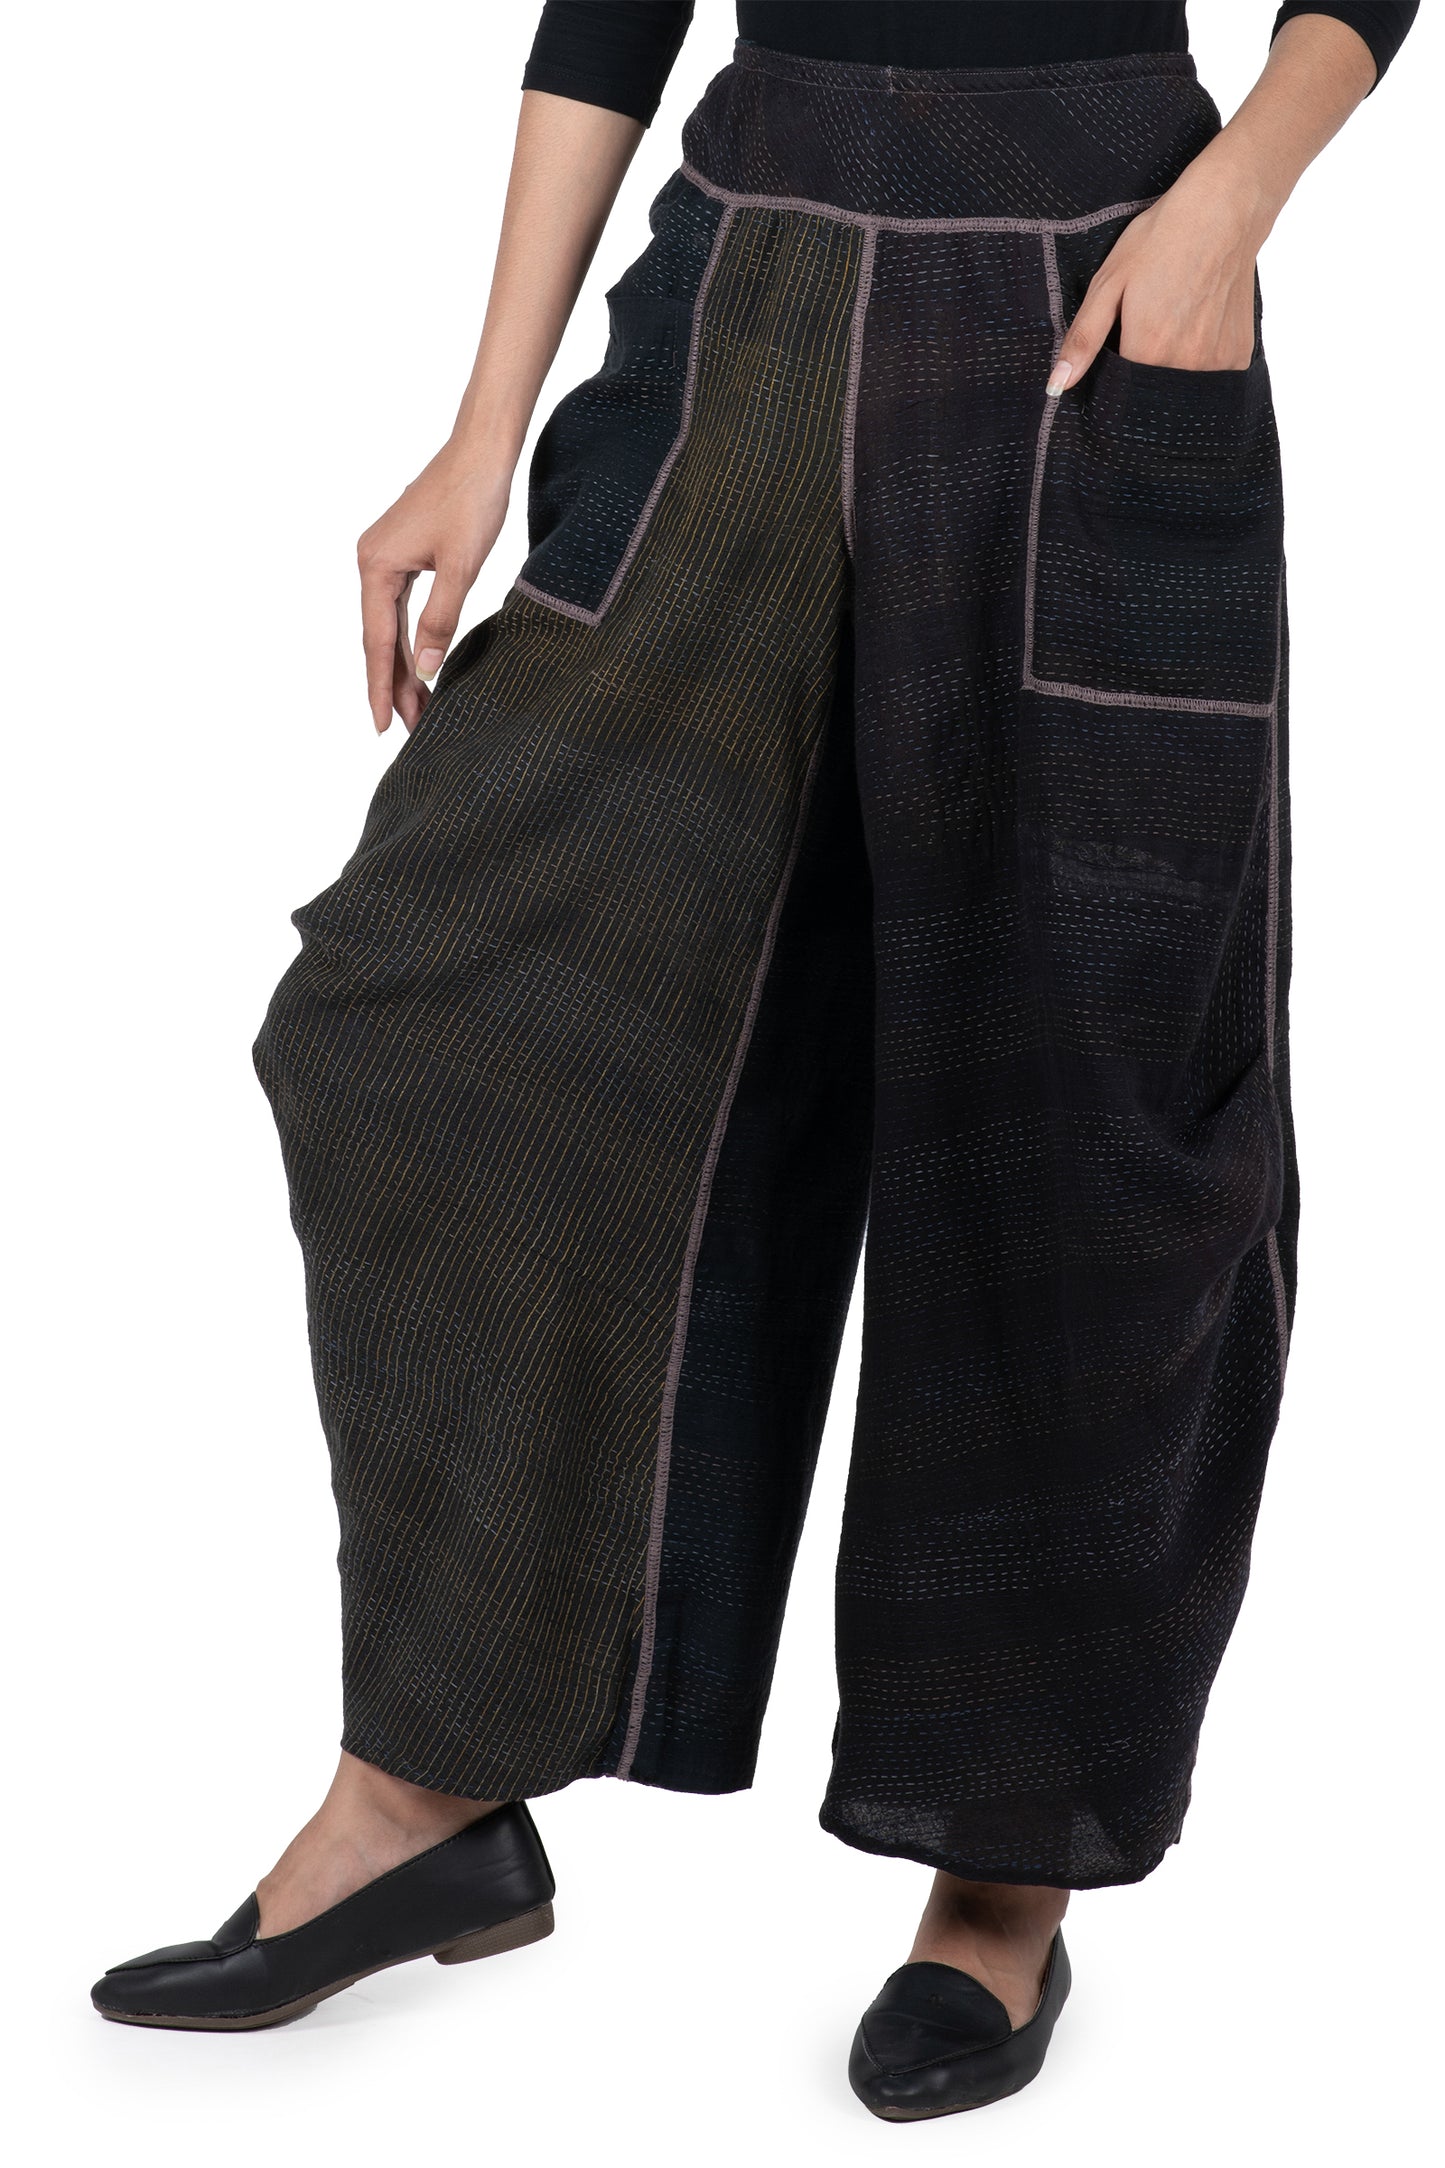 COTTON SILK SW PATCH KANTHA KNEE TUCKED PANTS